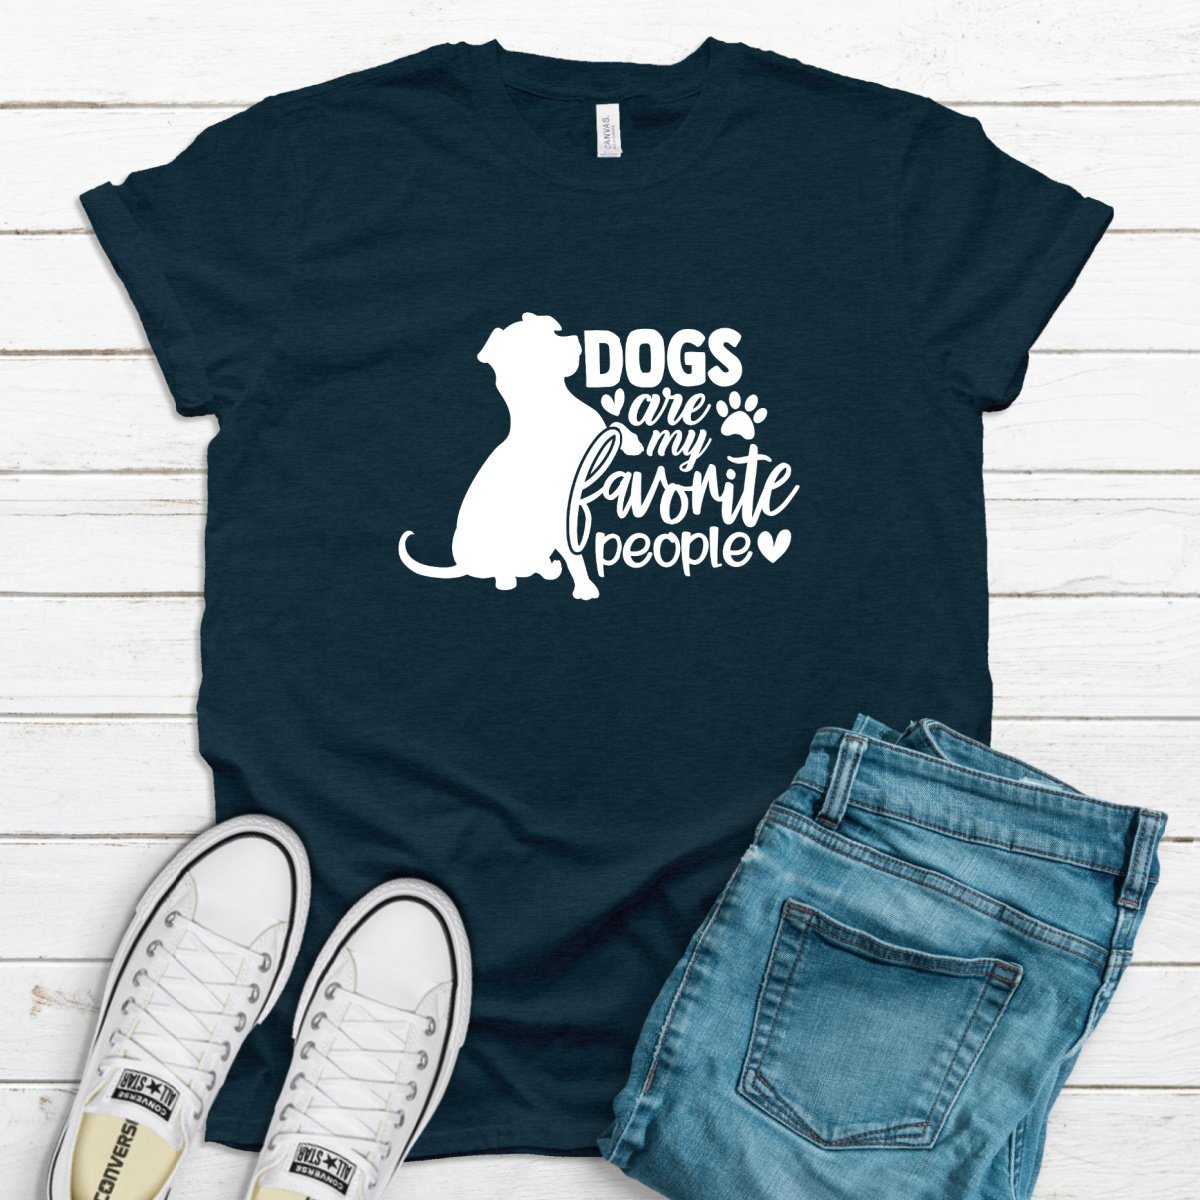 Dogs are my favorite people shirt Adult Tee Shirt The Teal Bandit 